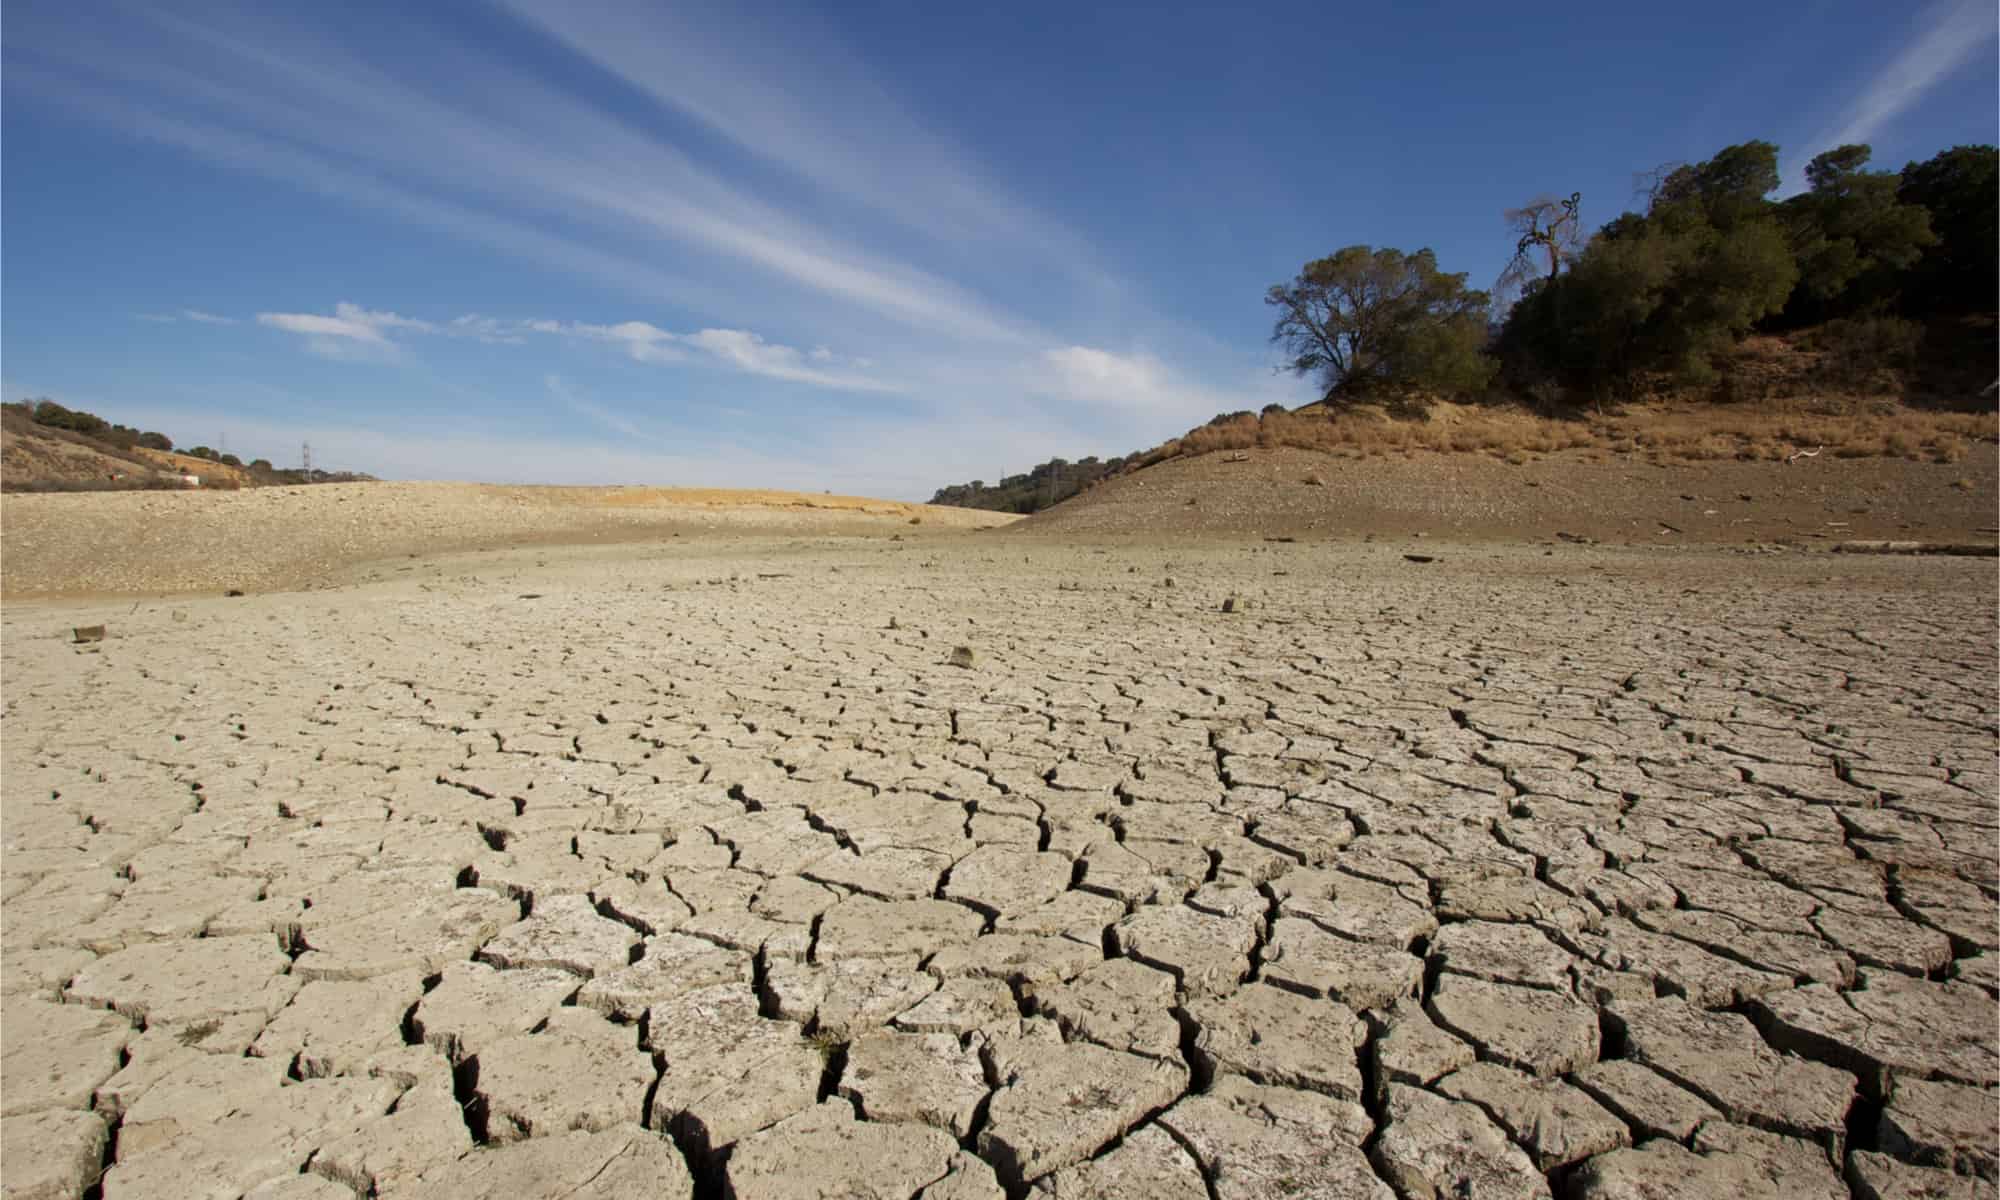 A dramatic south-looking view of Stevens Creek reservoir in California during a drought